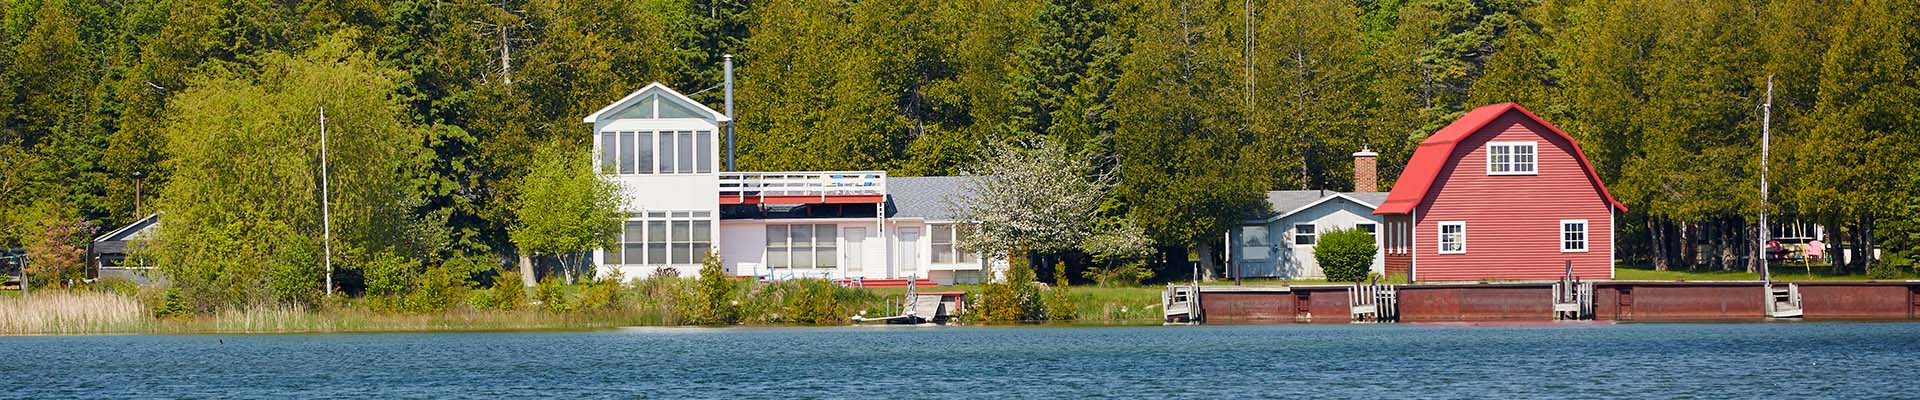 Three unique-looking rental cottages sit side by side on a crystal-blue shoreline.